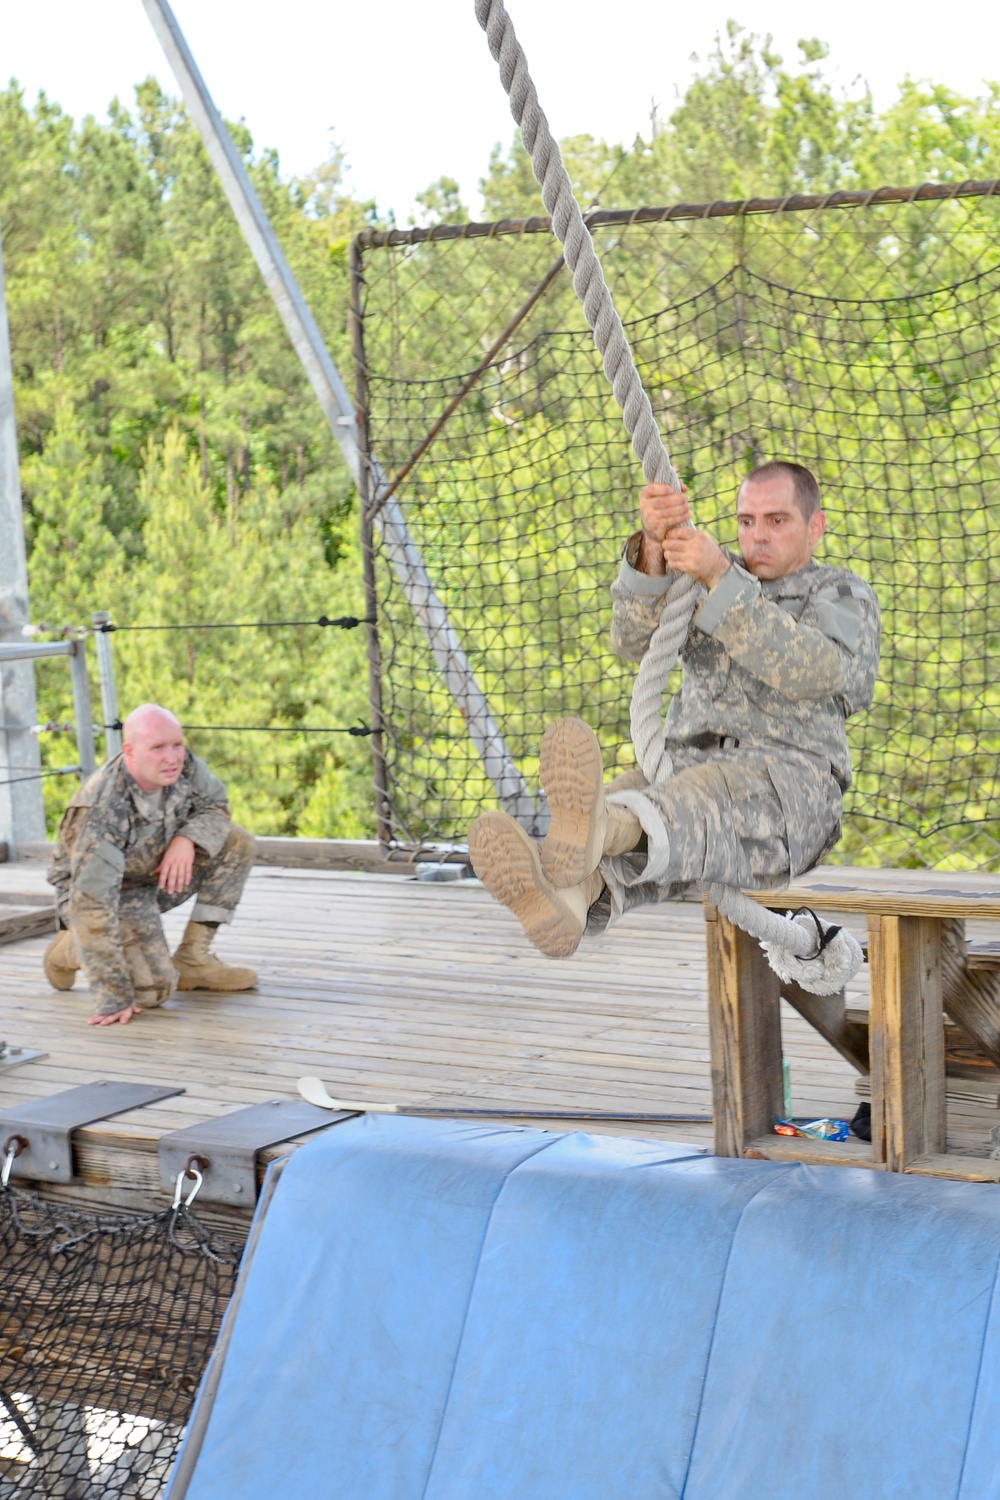 PMA candidates conquer Victory Tower at Fort Jackson, SC